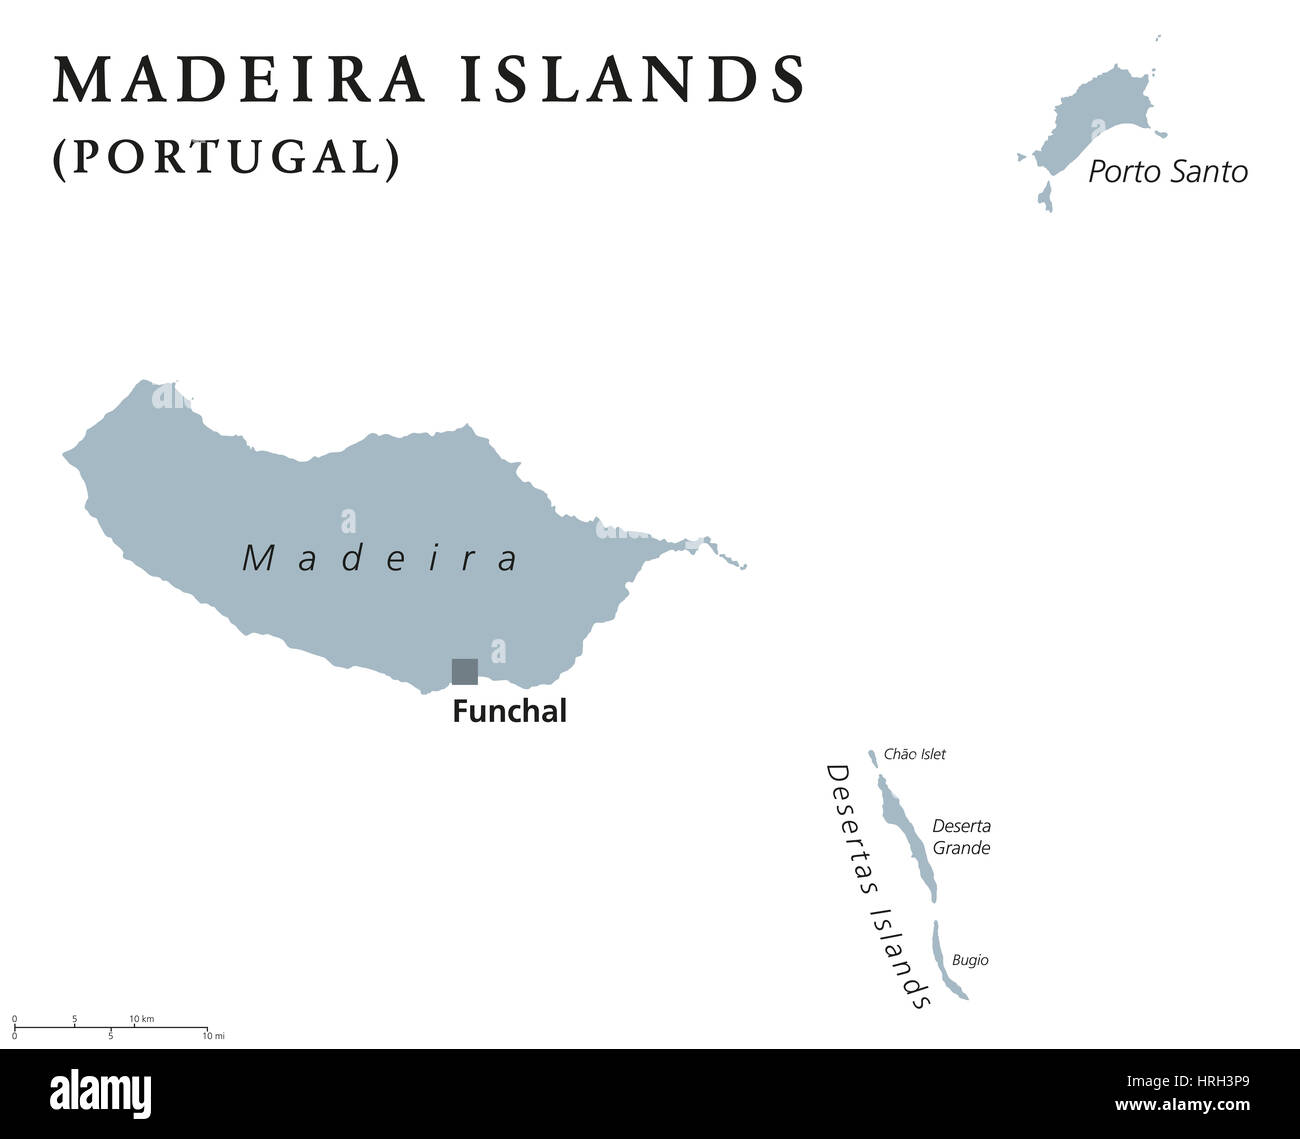 197 Portugal Map Madeira Azores Images, Stock Photos, 3D objects, & Vectors